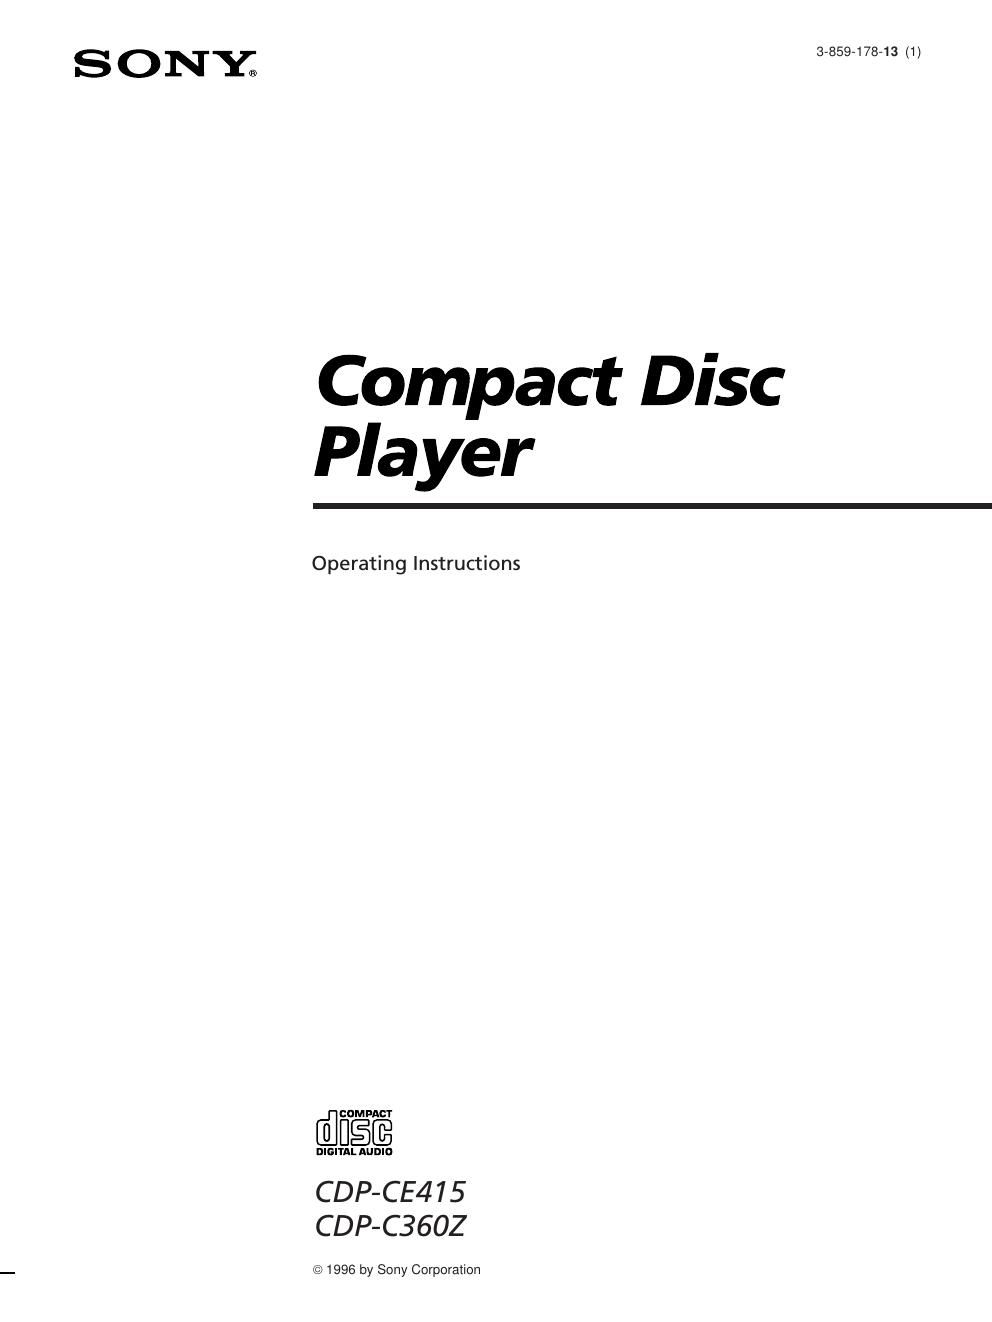 sony cdp ce 415 owners manual